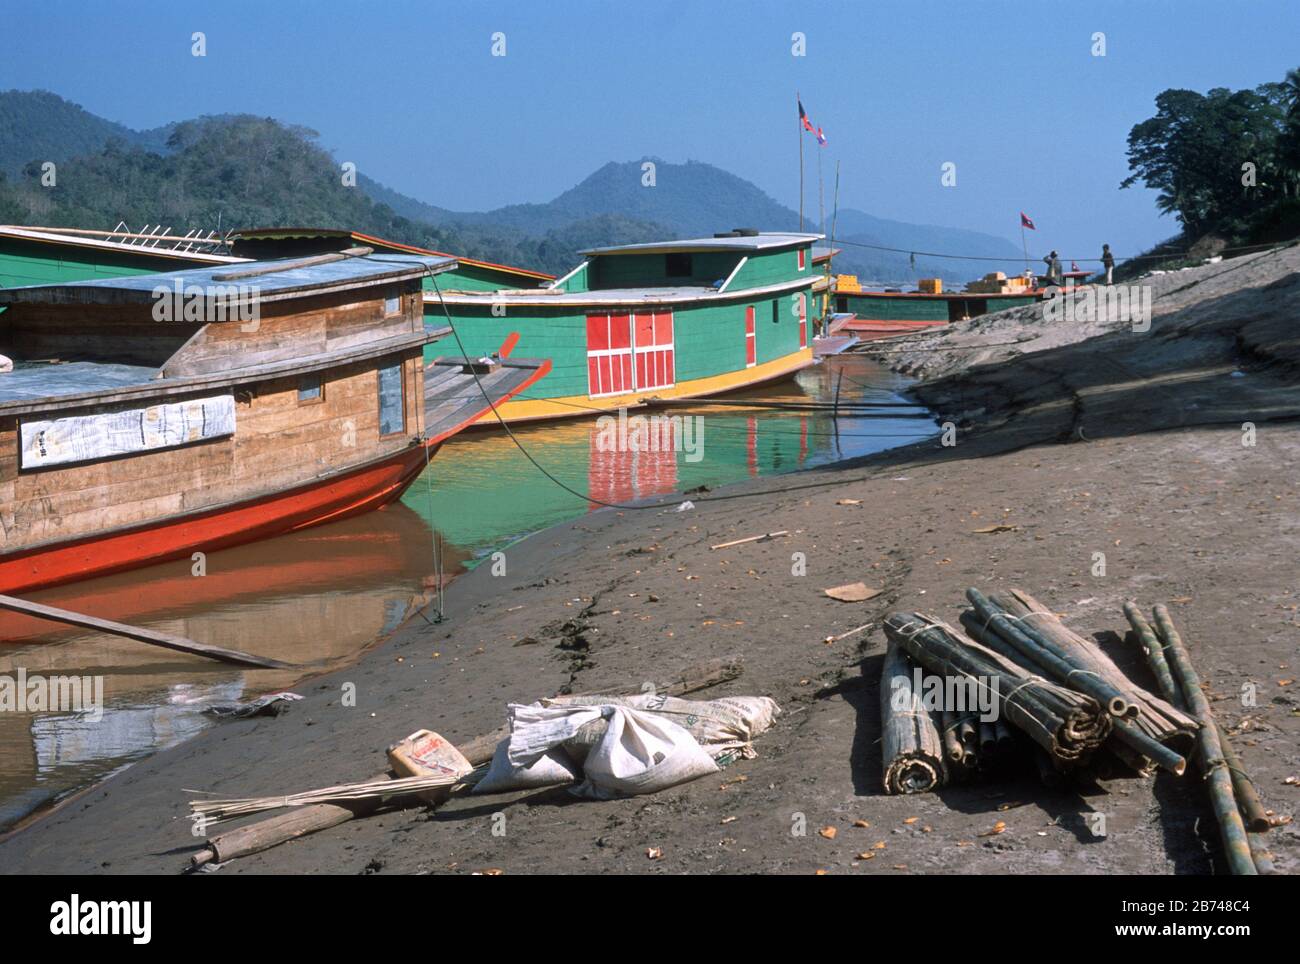 'Slow' boats tied up on the bank of the Mekong River in Laos. Lao flags fly from tall poles on each boat. Each boat has the traditional alter with offerings to the river on the foredeck. Cargo is waiting to be loaded on a jetty. Bright, red, green and yellow colours contrast with tree covered mountains and the blue sky behind. Stock Photo